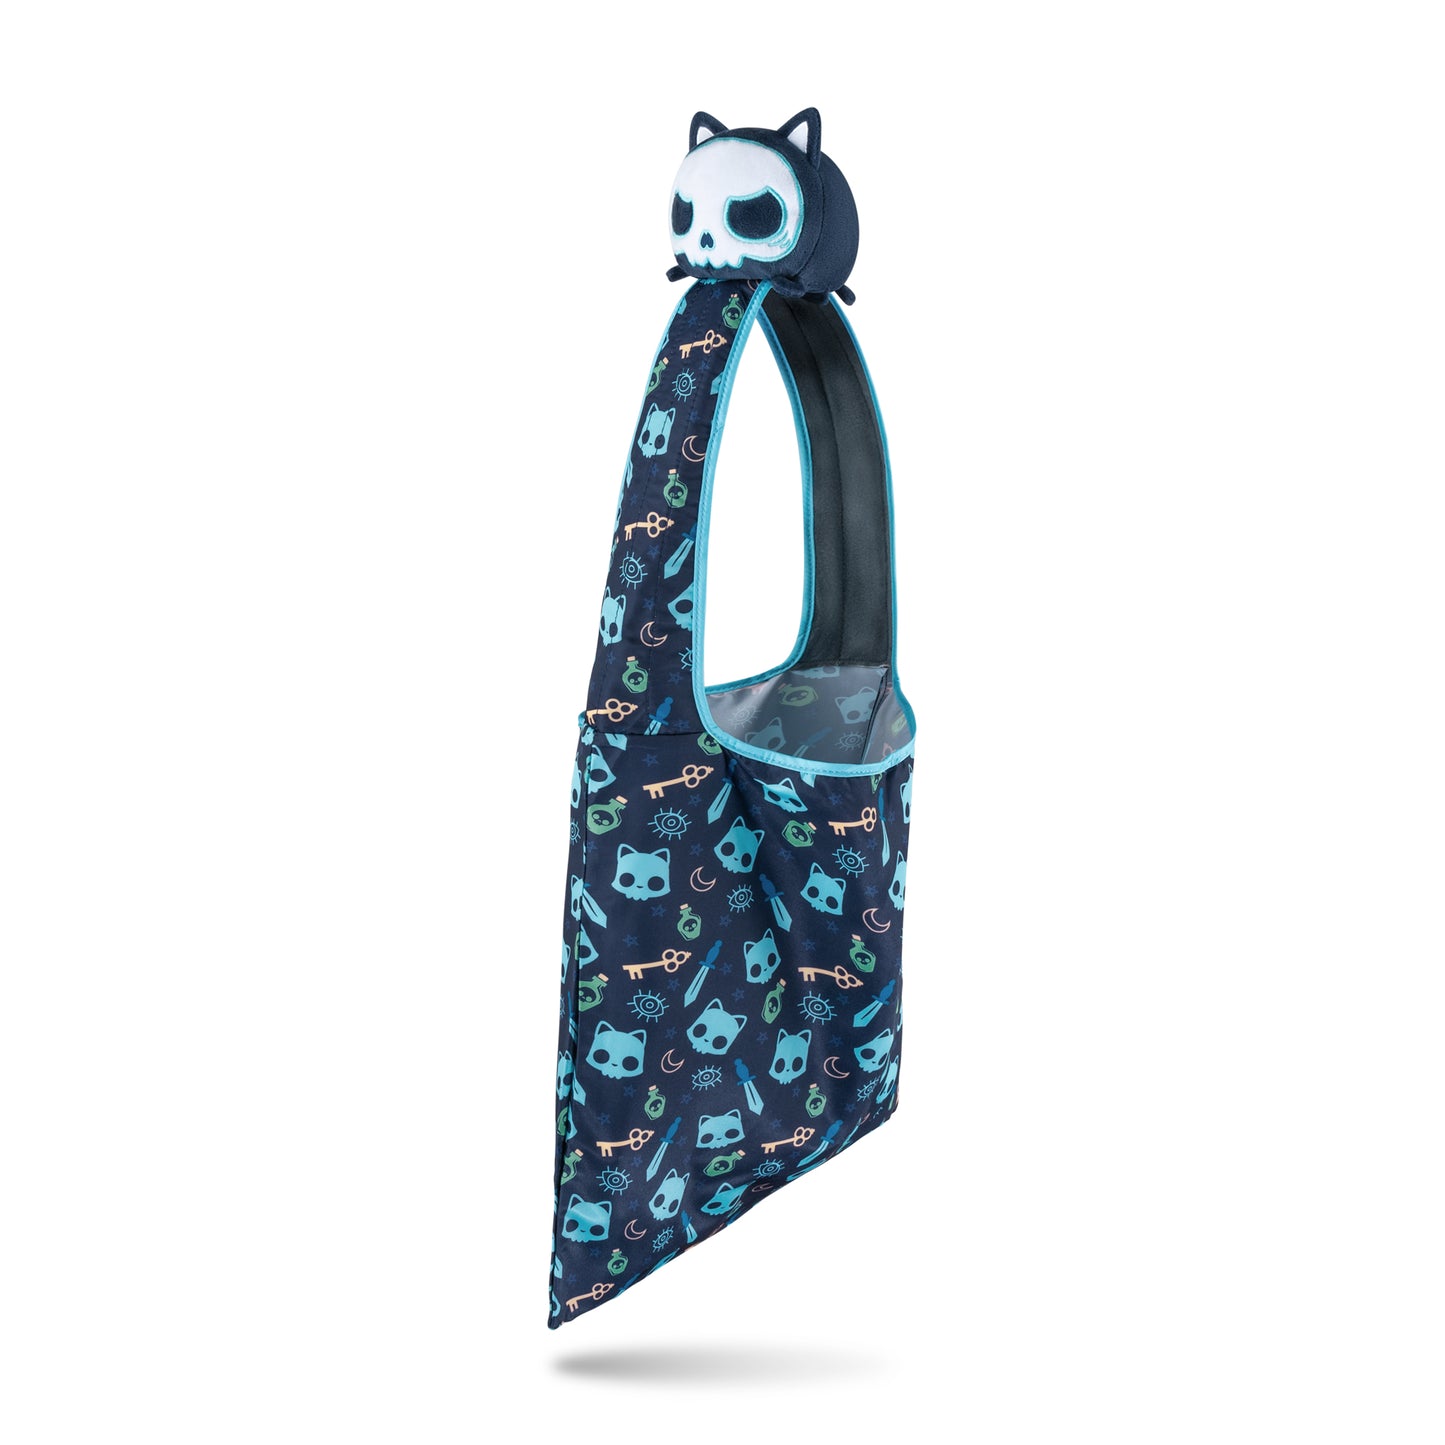 A TeeTurtle Plushiverse Skeleton Cat Plushie Tote Bag with a stuffed animal on it featuring a secret tote bag.